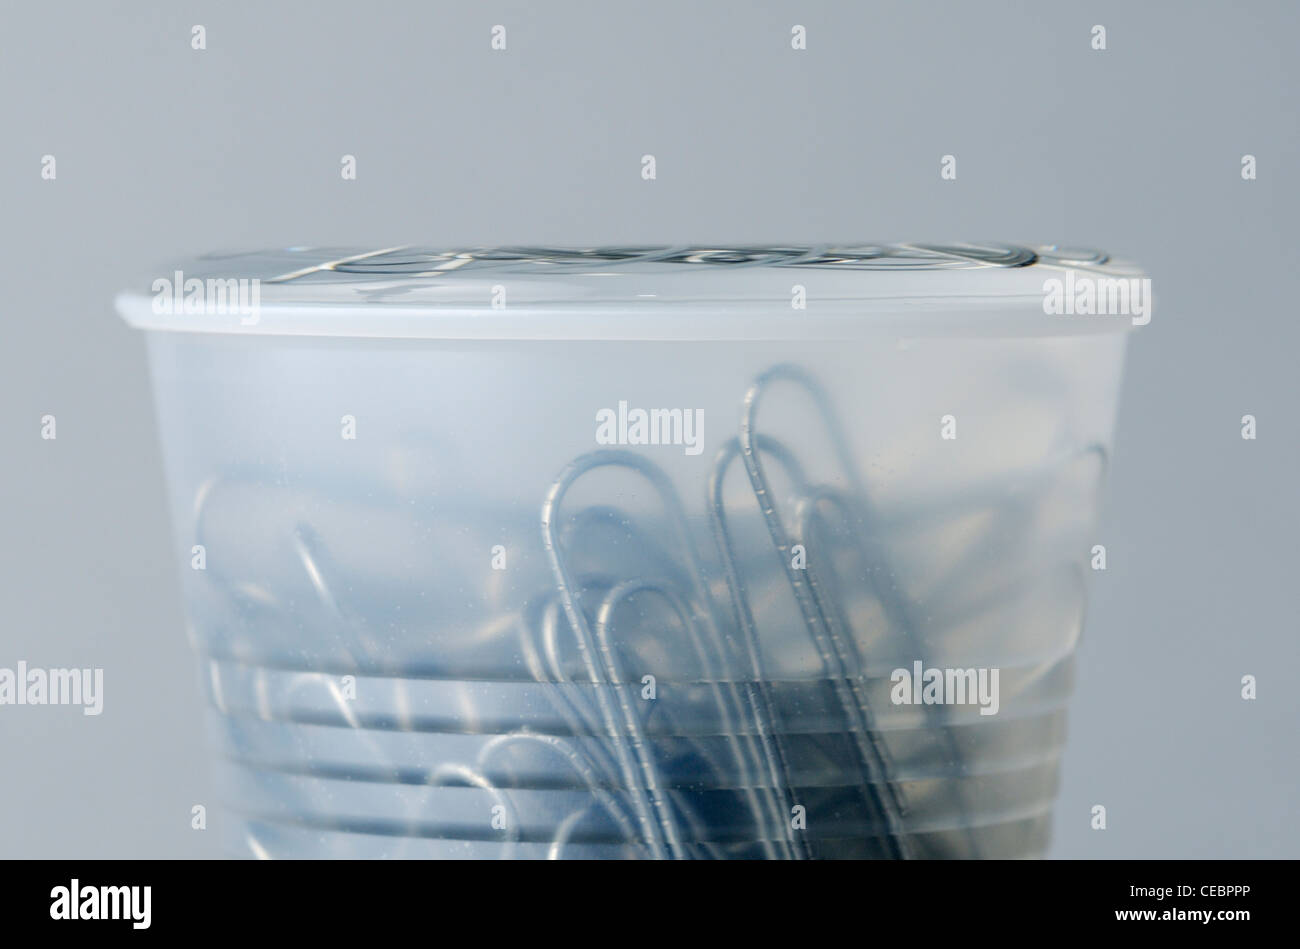 Water displaced above rim of cup by paper clips showing surface tension caused by cohesion between the polar water molecules Stock Photo